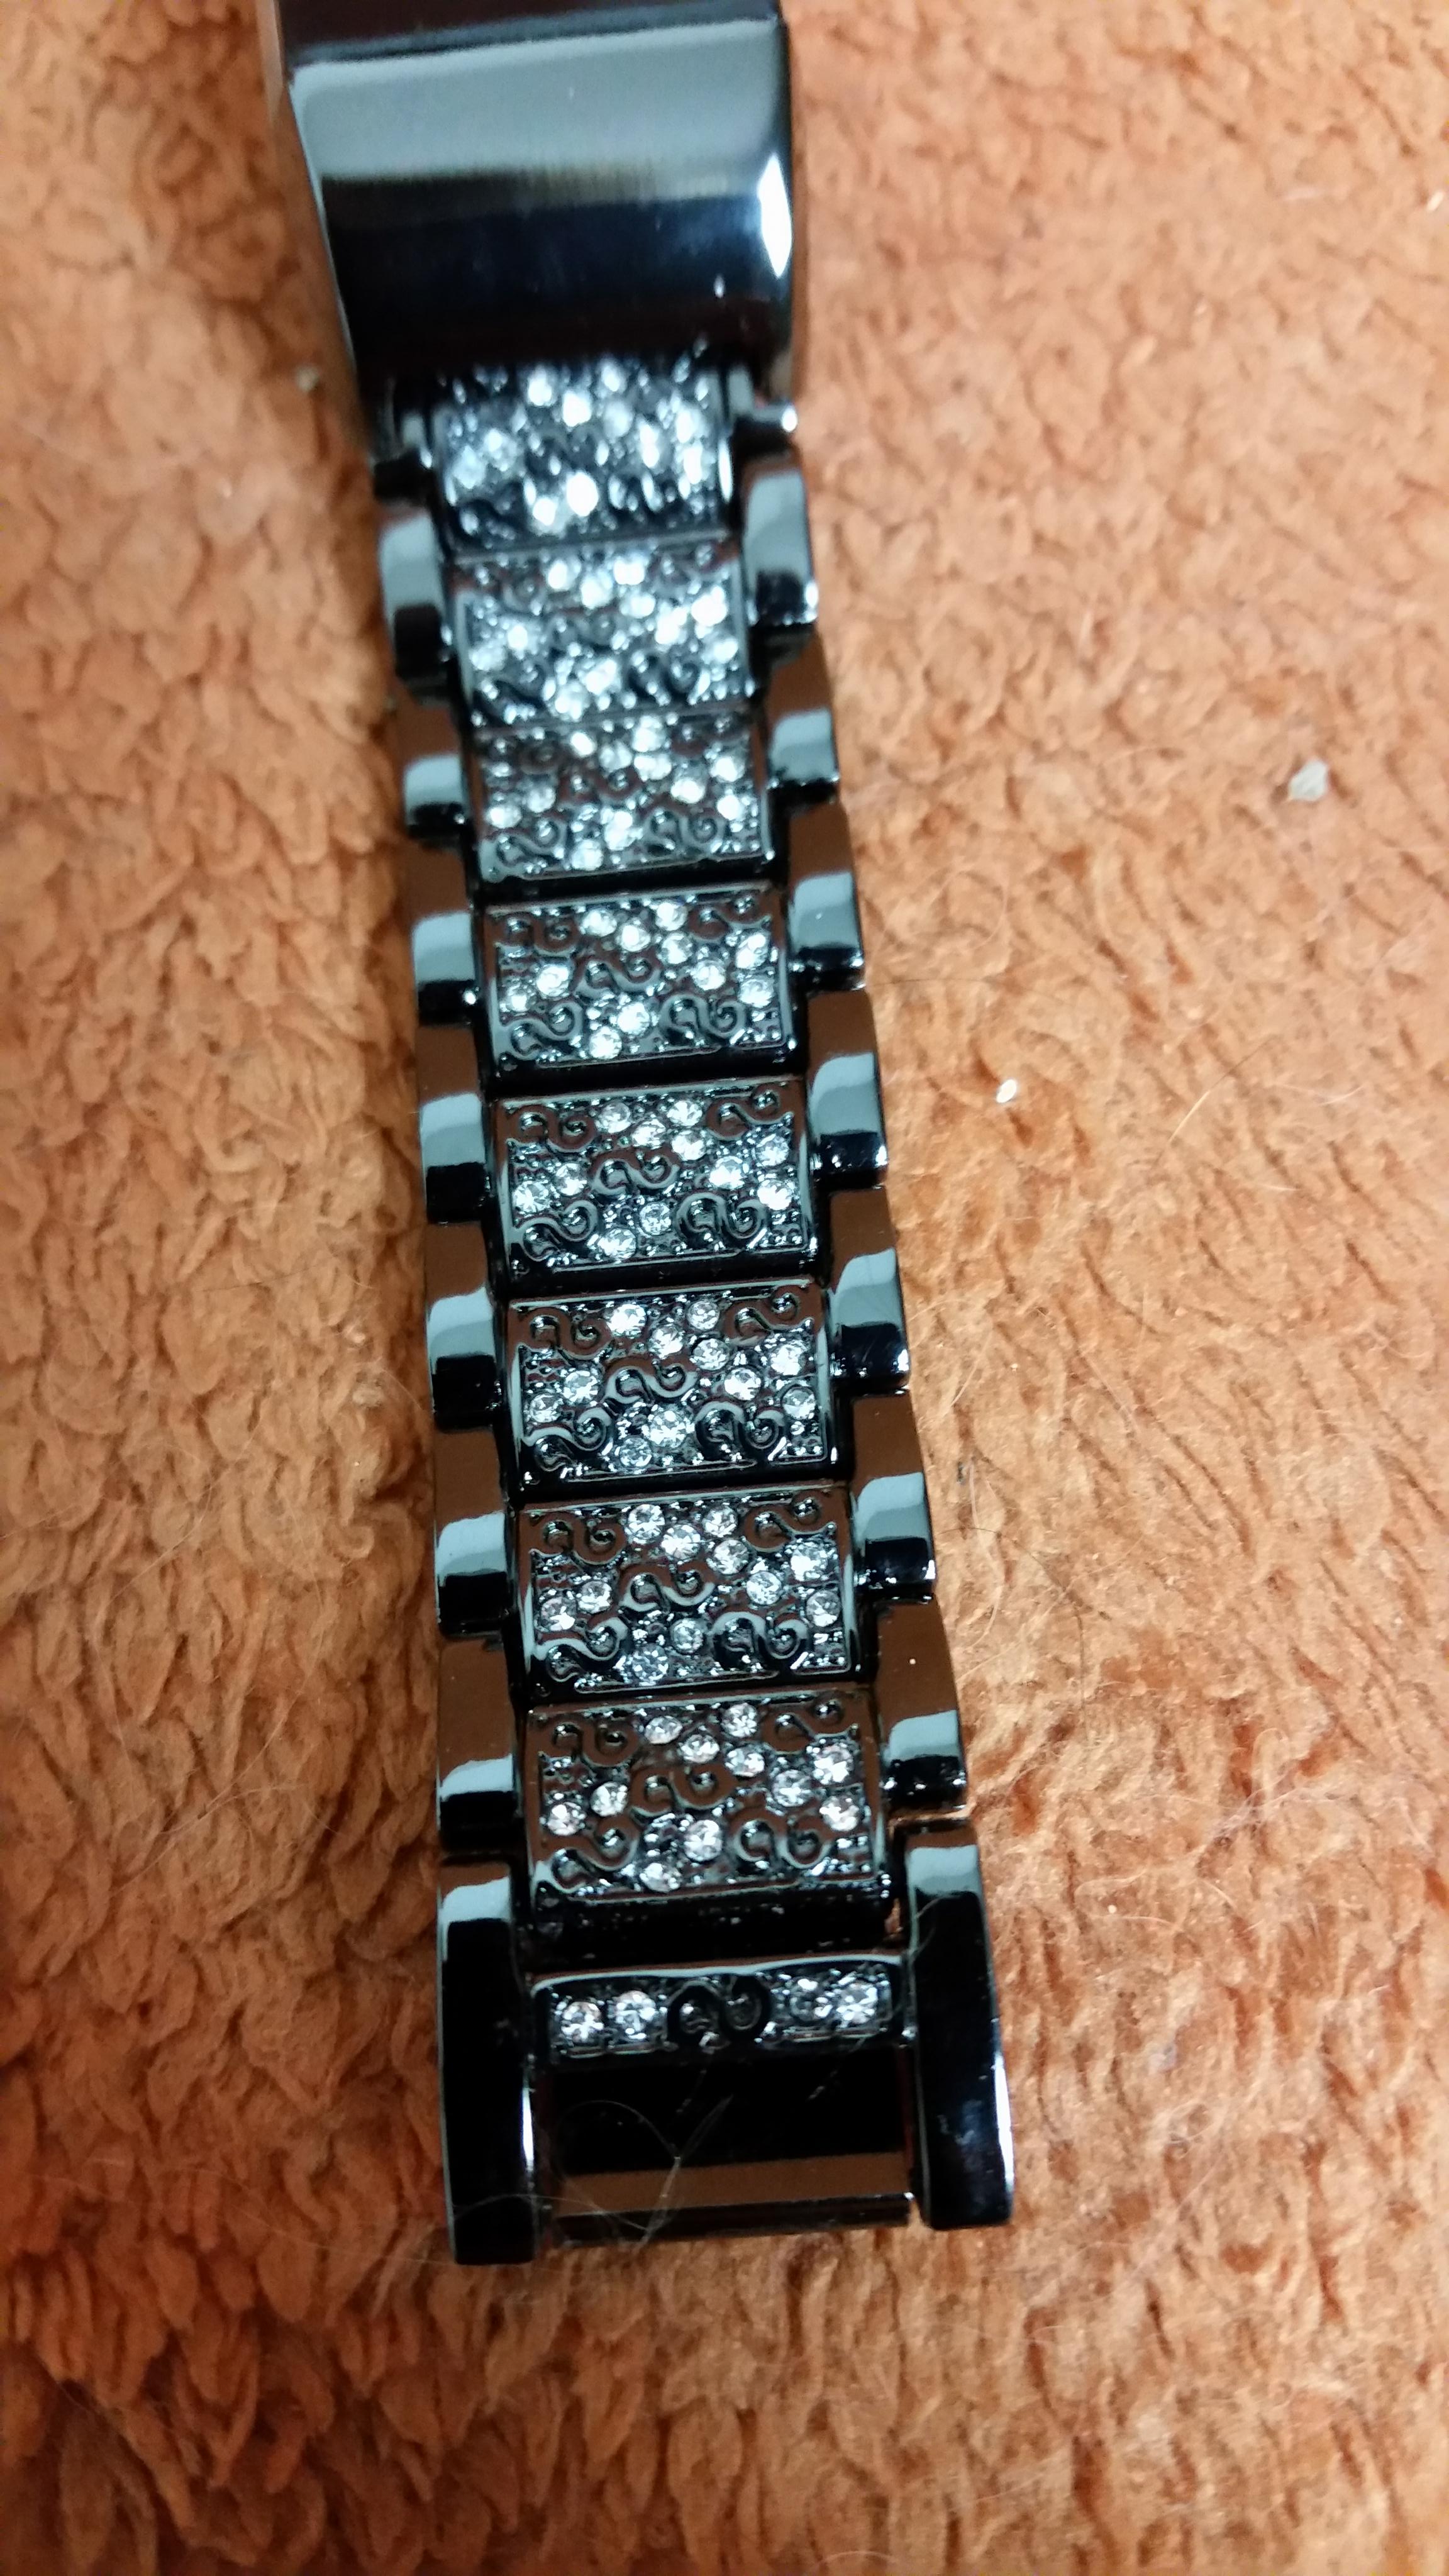 Shine on crazy diamond, beautiful band has stones that sparkle in the sun, very classy looking & unique, high quality, comfy, & adjustable.